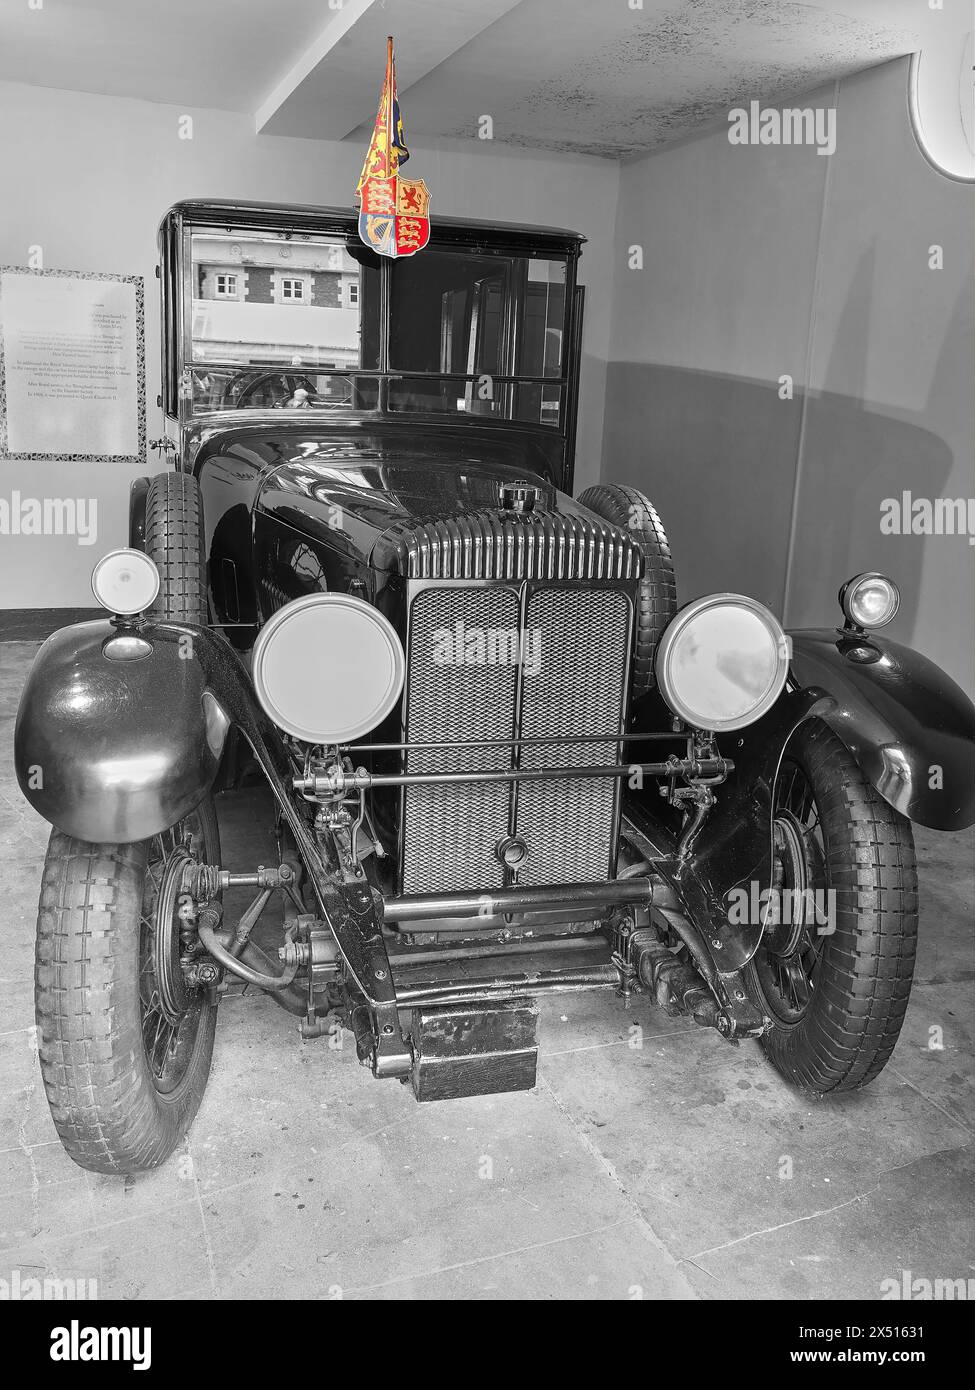 Daimler Double Six-Brougham car, bought by king George V in 1929,  in a garage at the country residence of the british monarch, Sandringham House. Stock Photo